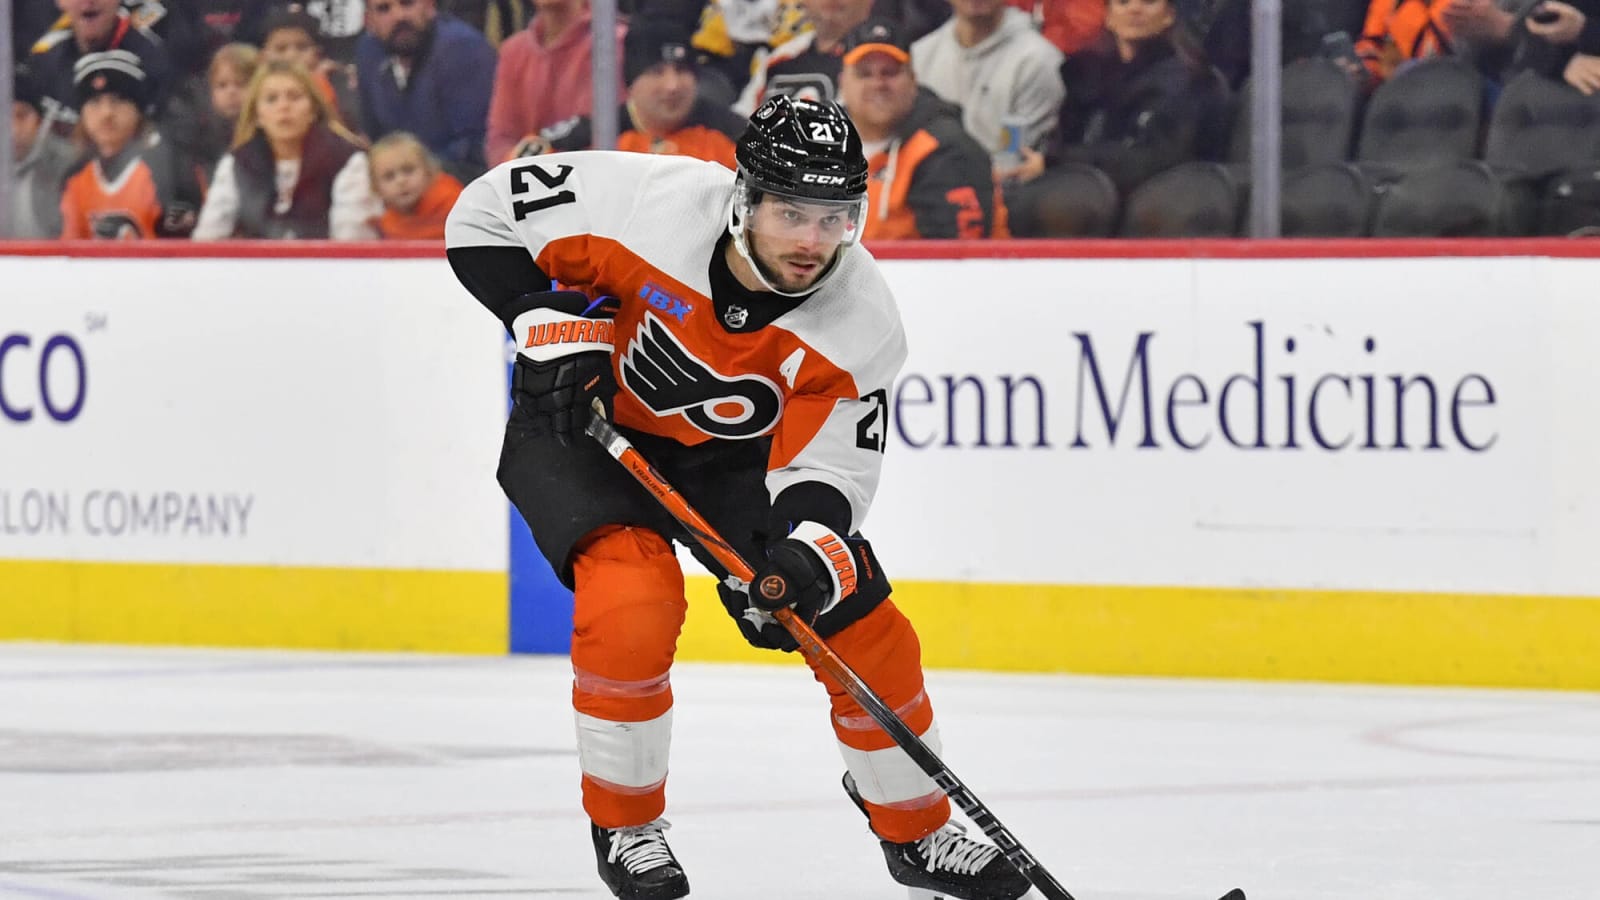 Flyers Must Balance Building Assets While Keeping NHL Roster